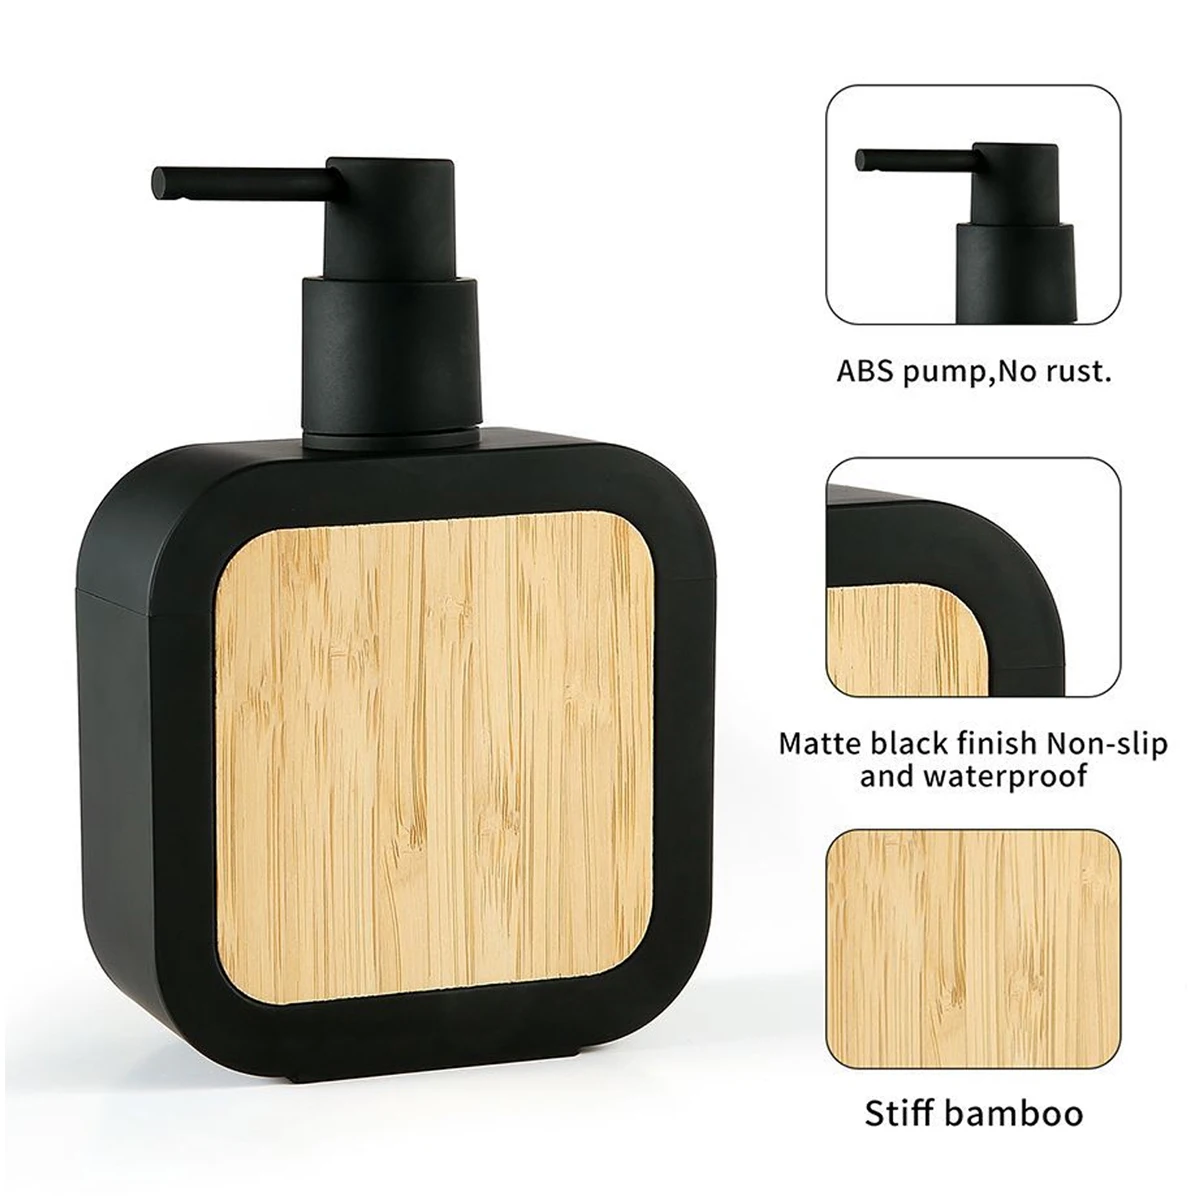 S504980672ab04b1d82300ed2a743de03B Square Soap Dispenser with Bamboo Pump Hands Soap Bottle Refillable Liquid Sub-bottling for Bathroom and Kitchen Decor